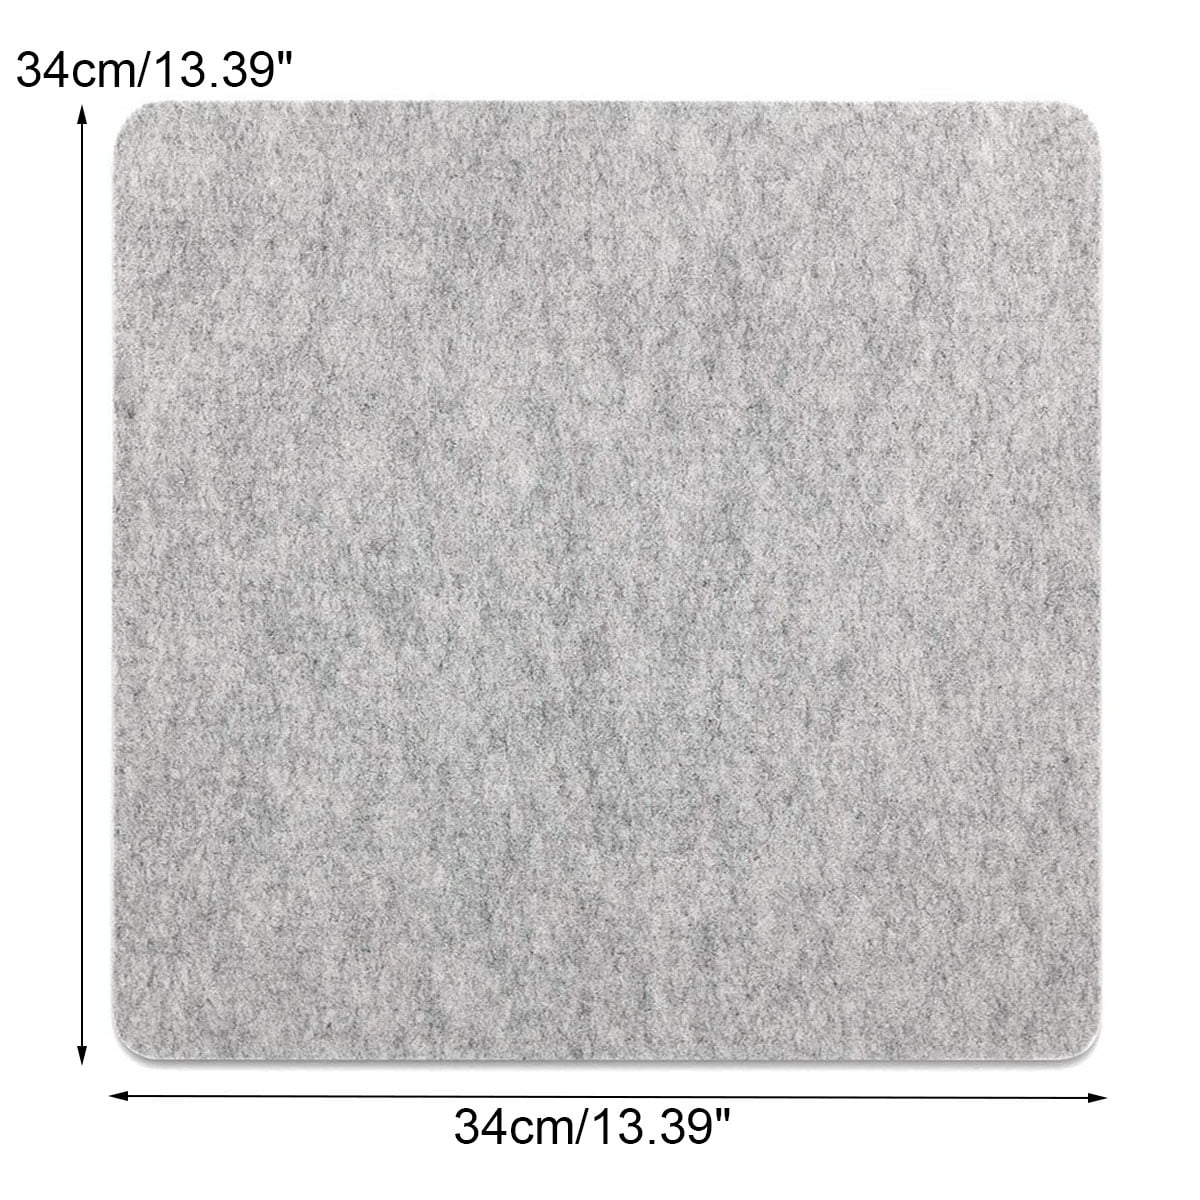 Details about   Large Wool Ironing Felt Mat Pressing Pad High Temperature Ironing Board Felt Pad 